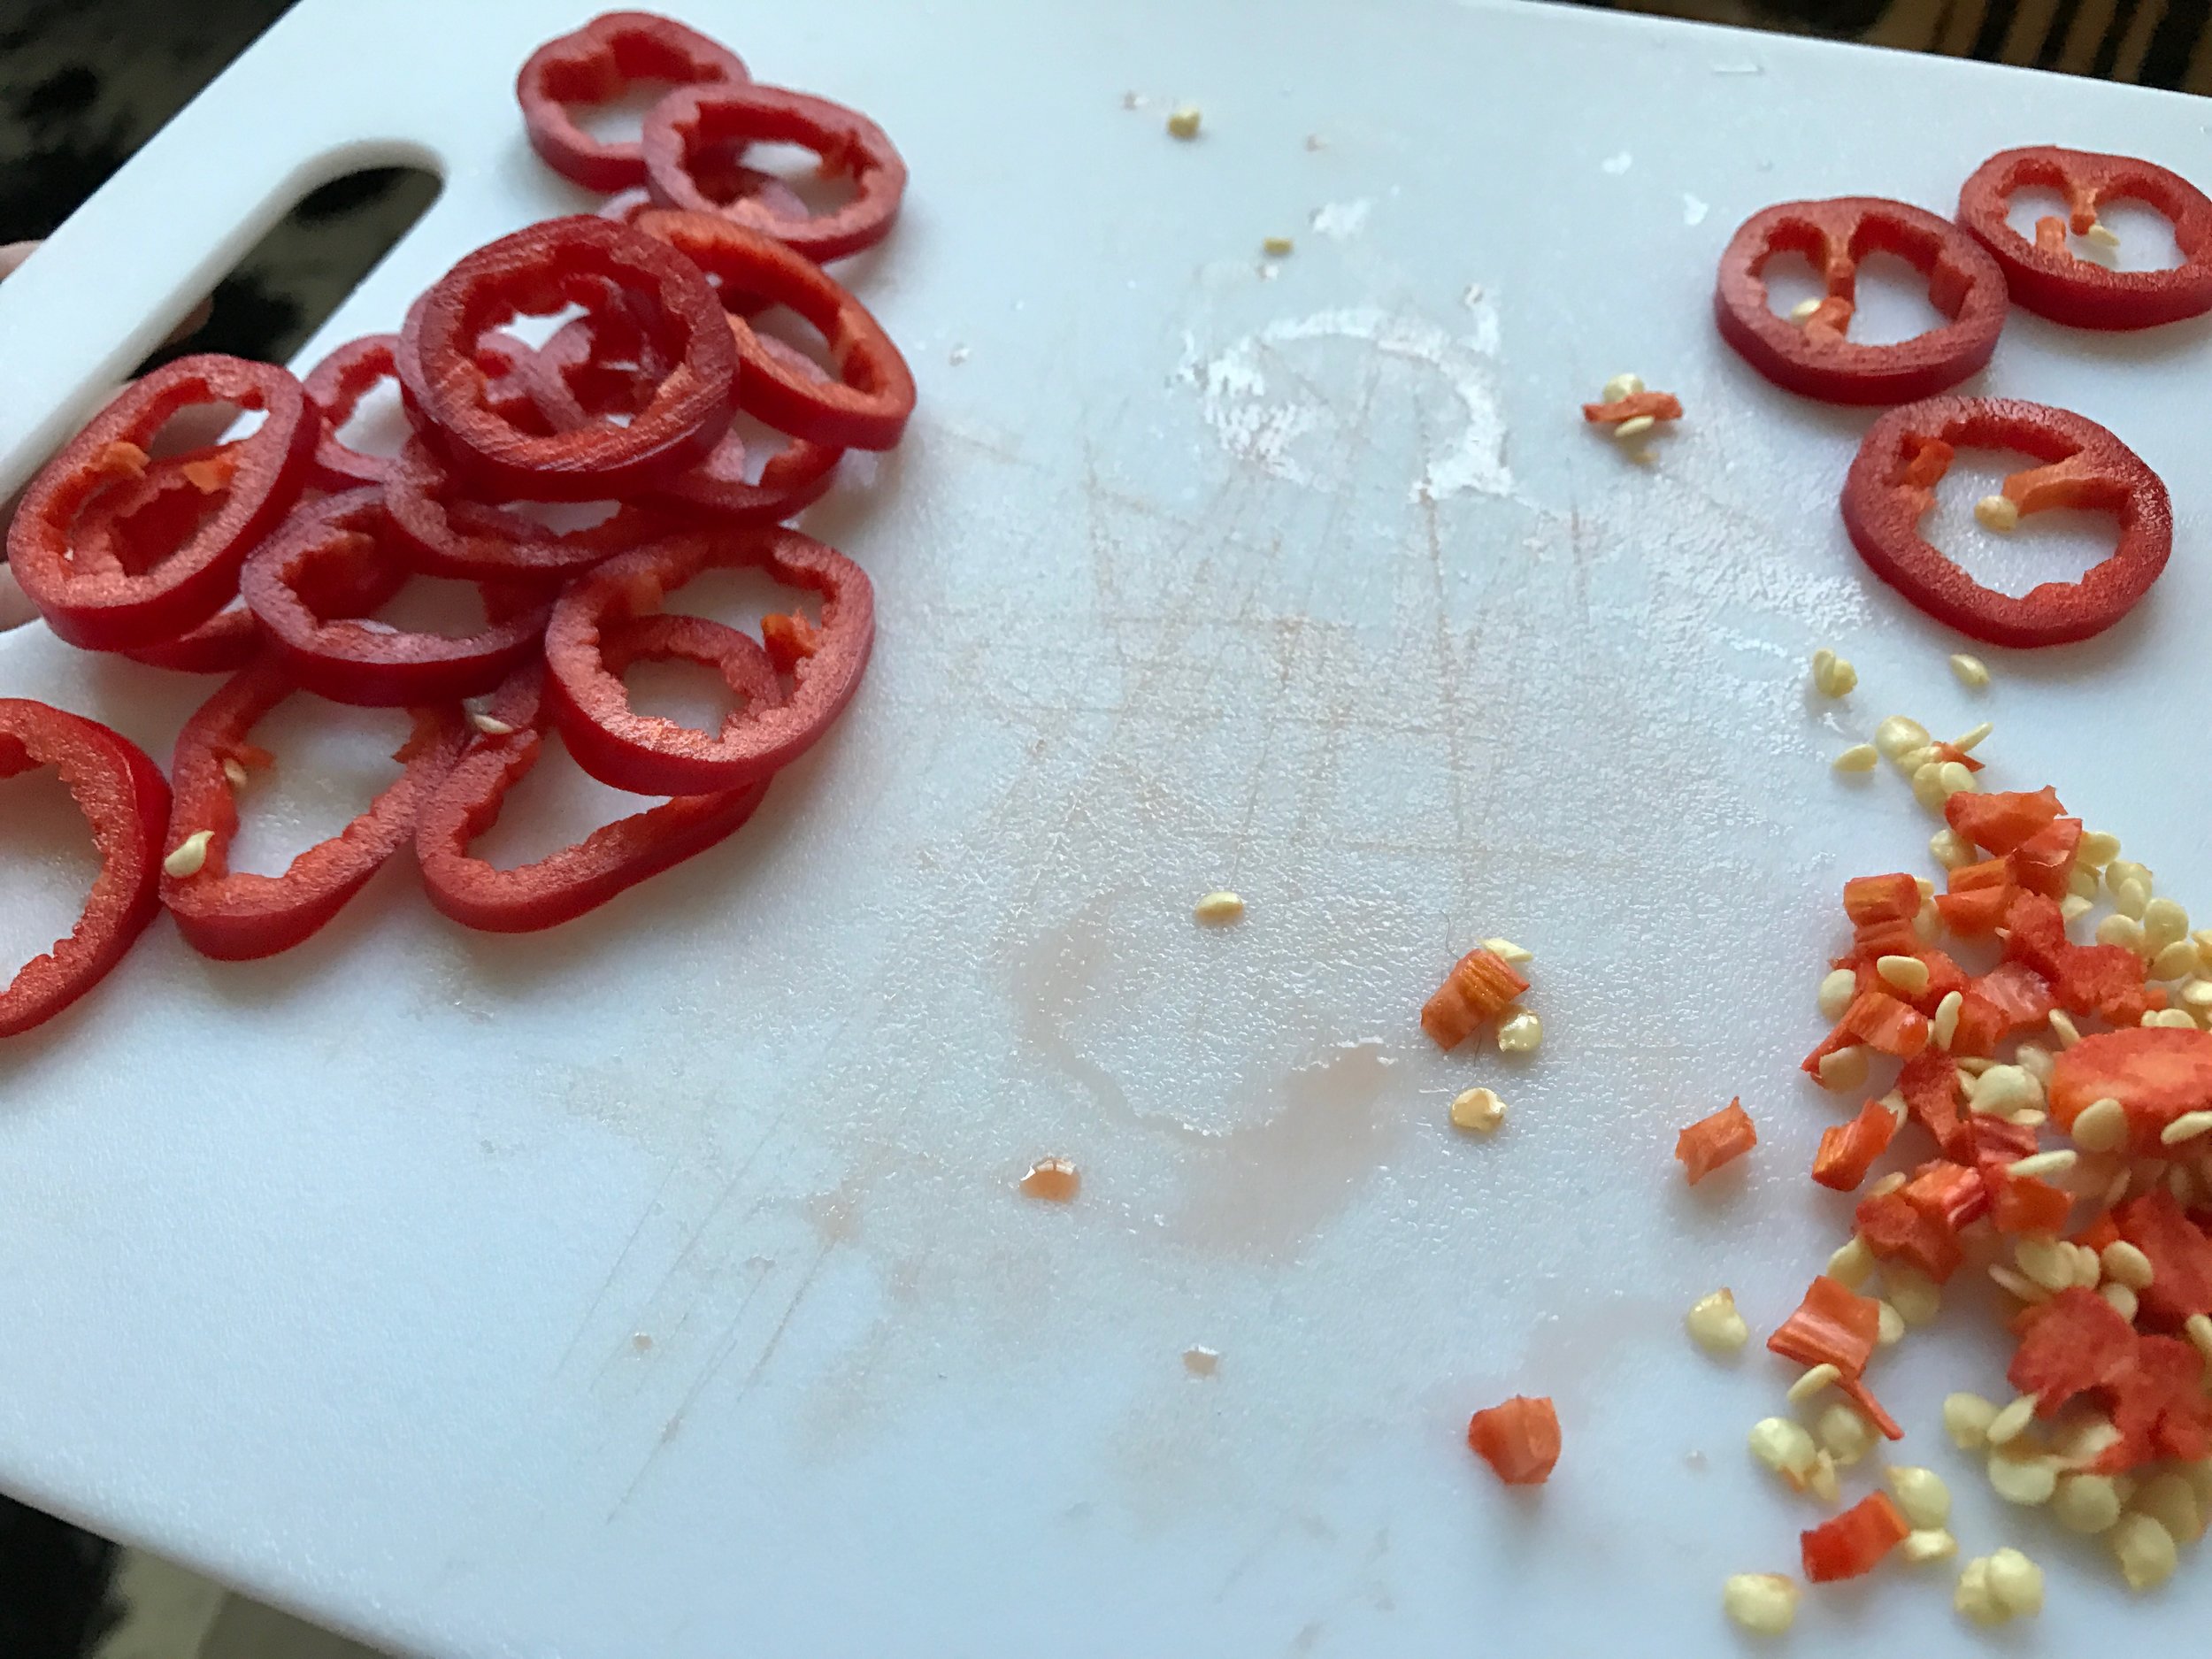 removing more pepper seeds